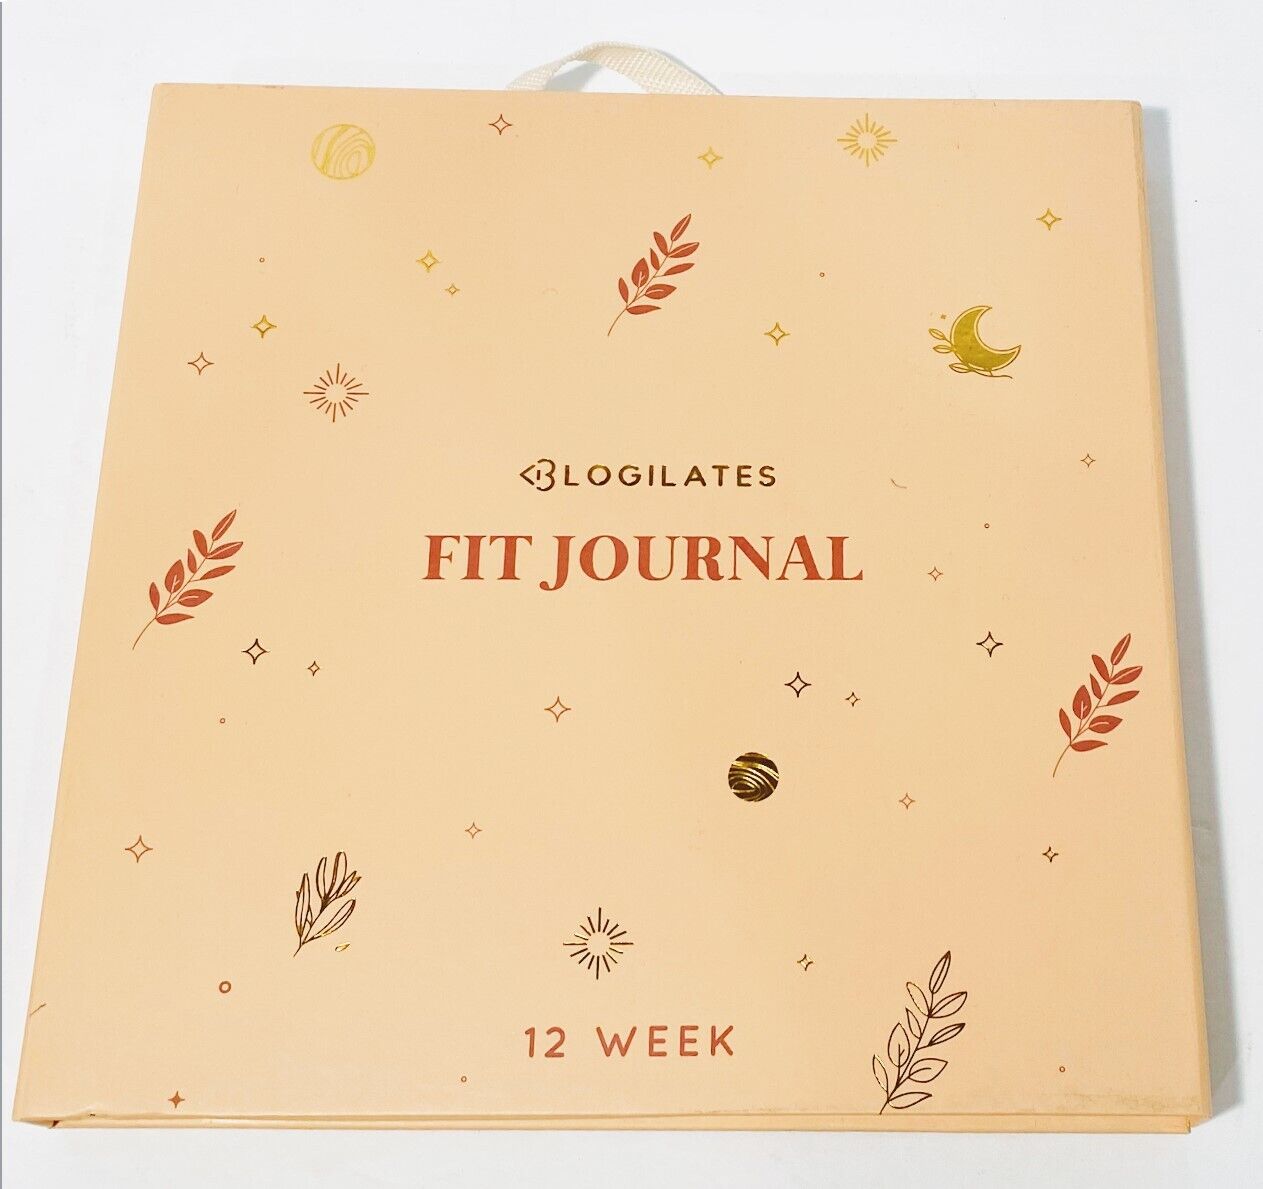 Blogilates 12 Week Fit Journal with Tape Measure and Pen - NEW